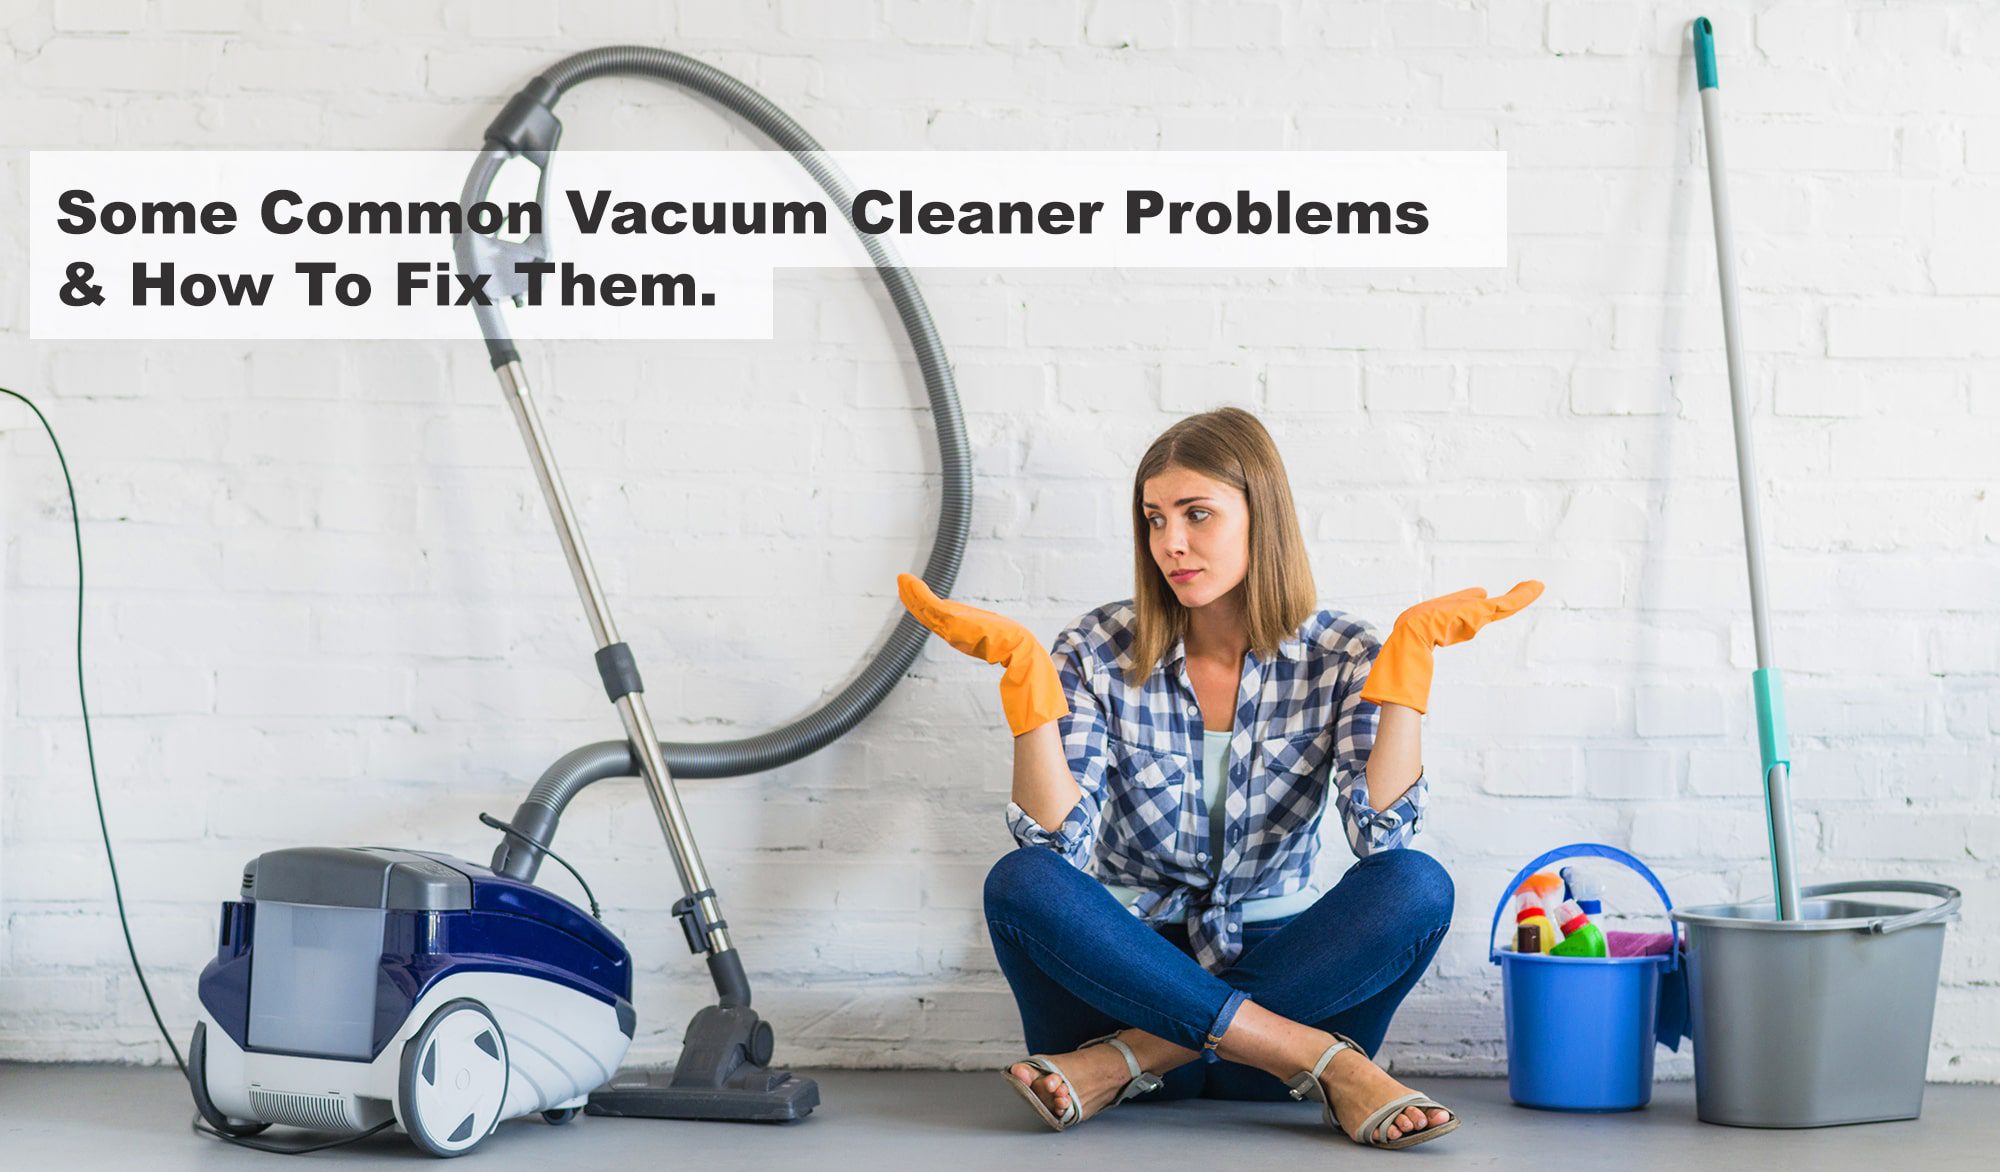 Spa Vacuum Cleaner: What are the common problems?